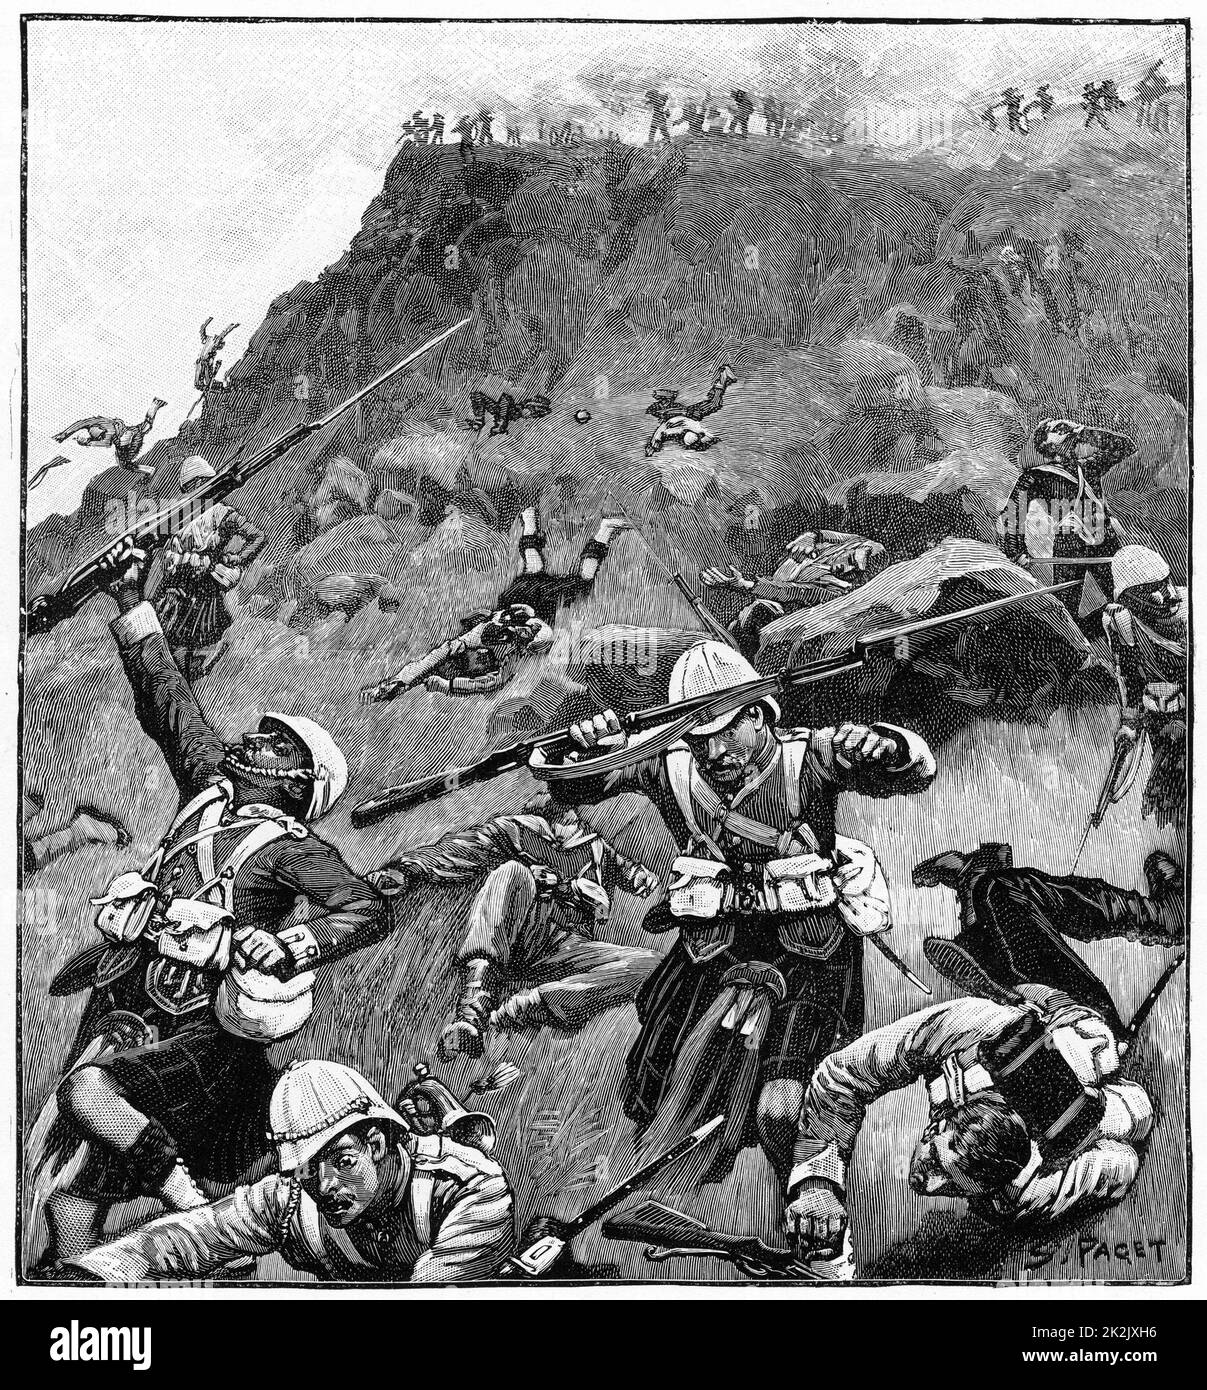 Battle of Majuba Hill, 27 February 1881, lst Boer War. British under General Colley, routed by the Boers. 92nd Gordon Highlands in retreat. Engraving Stock Photo